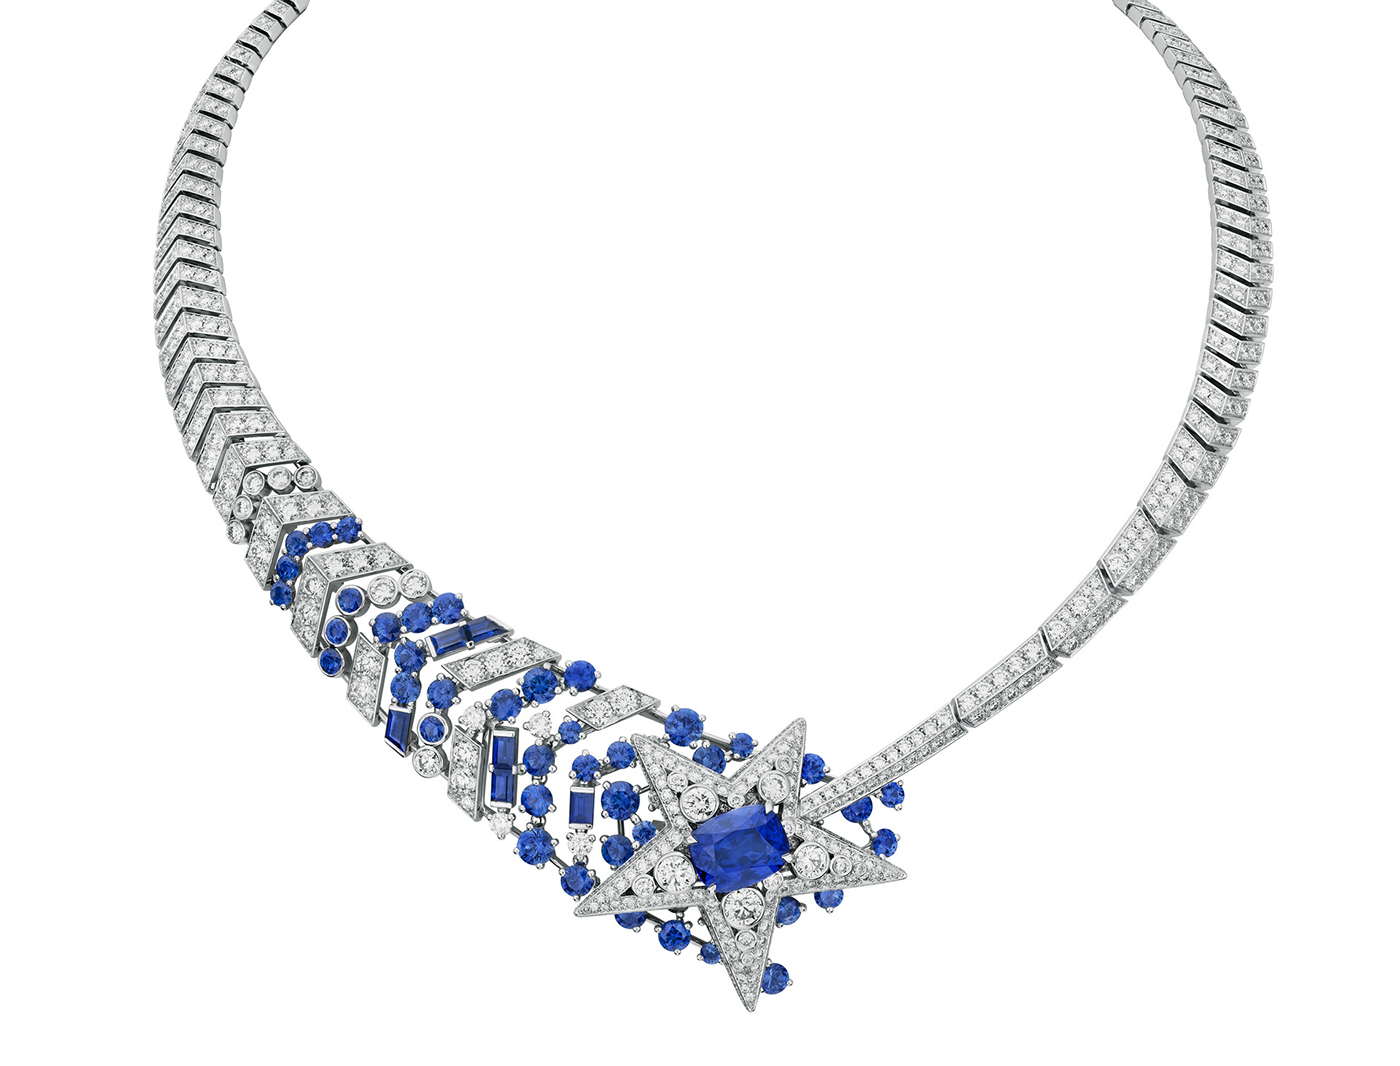 Chanel's Latest High Jewelry Is an Ode to the Legendary No. 5